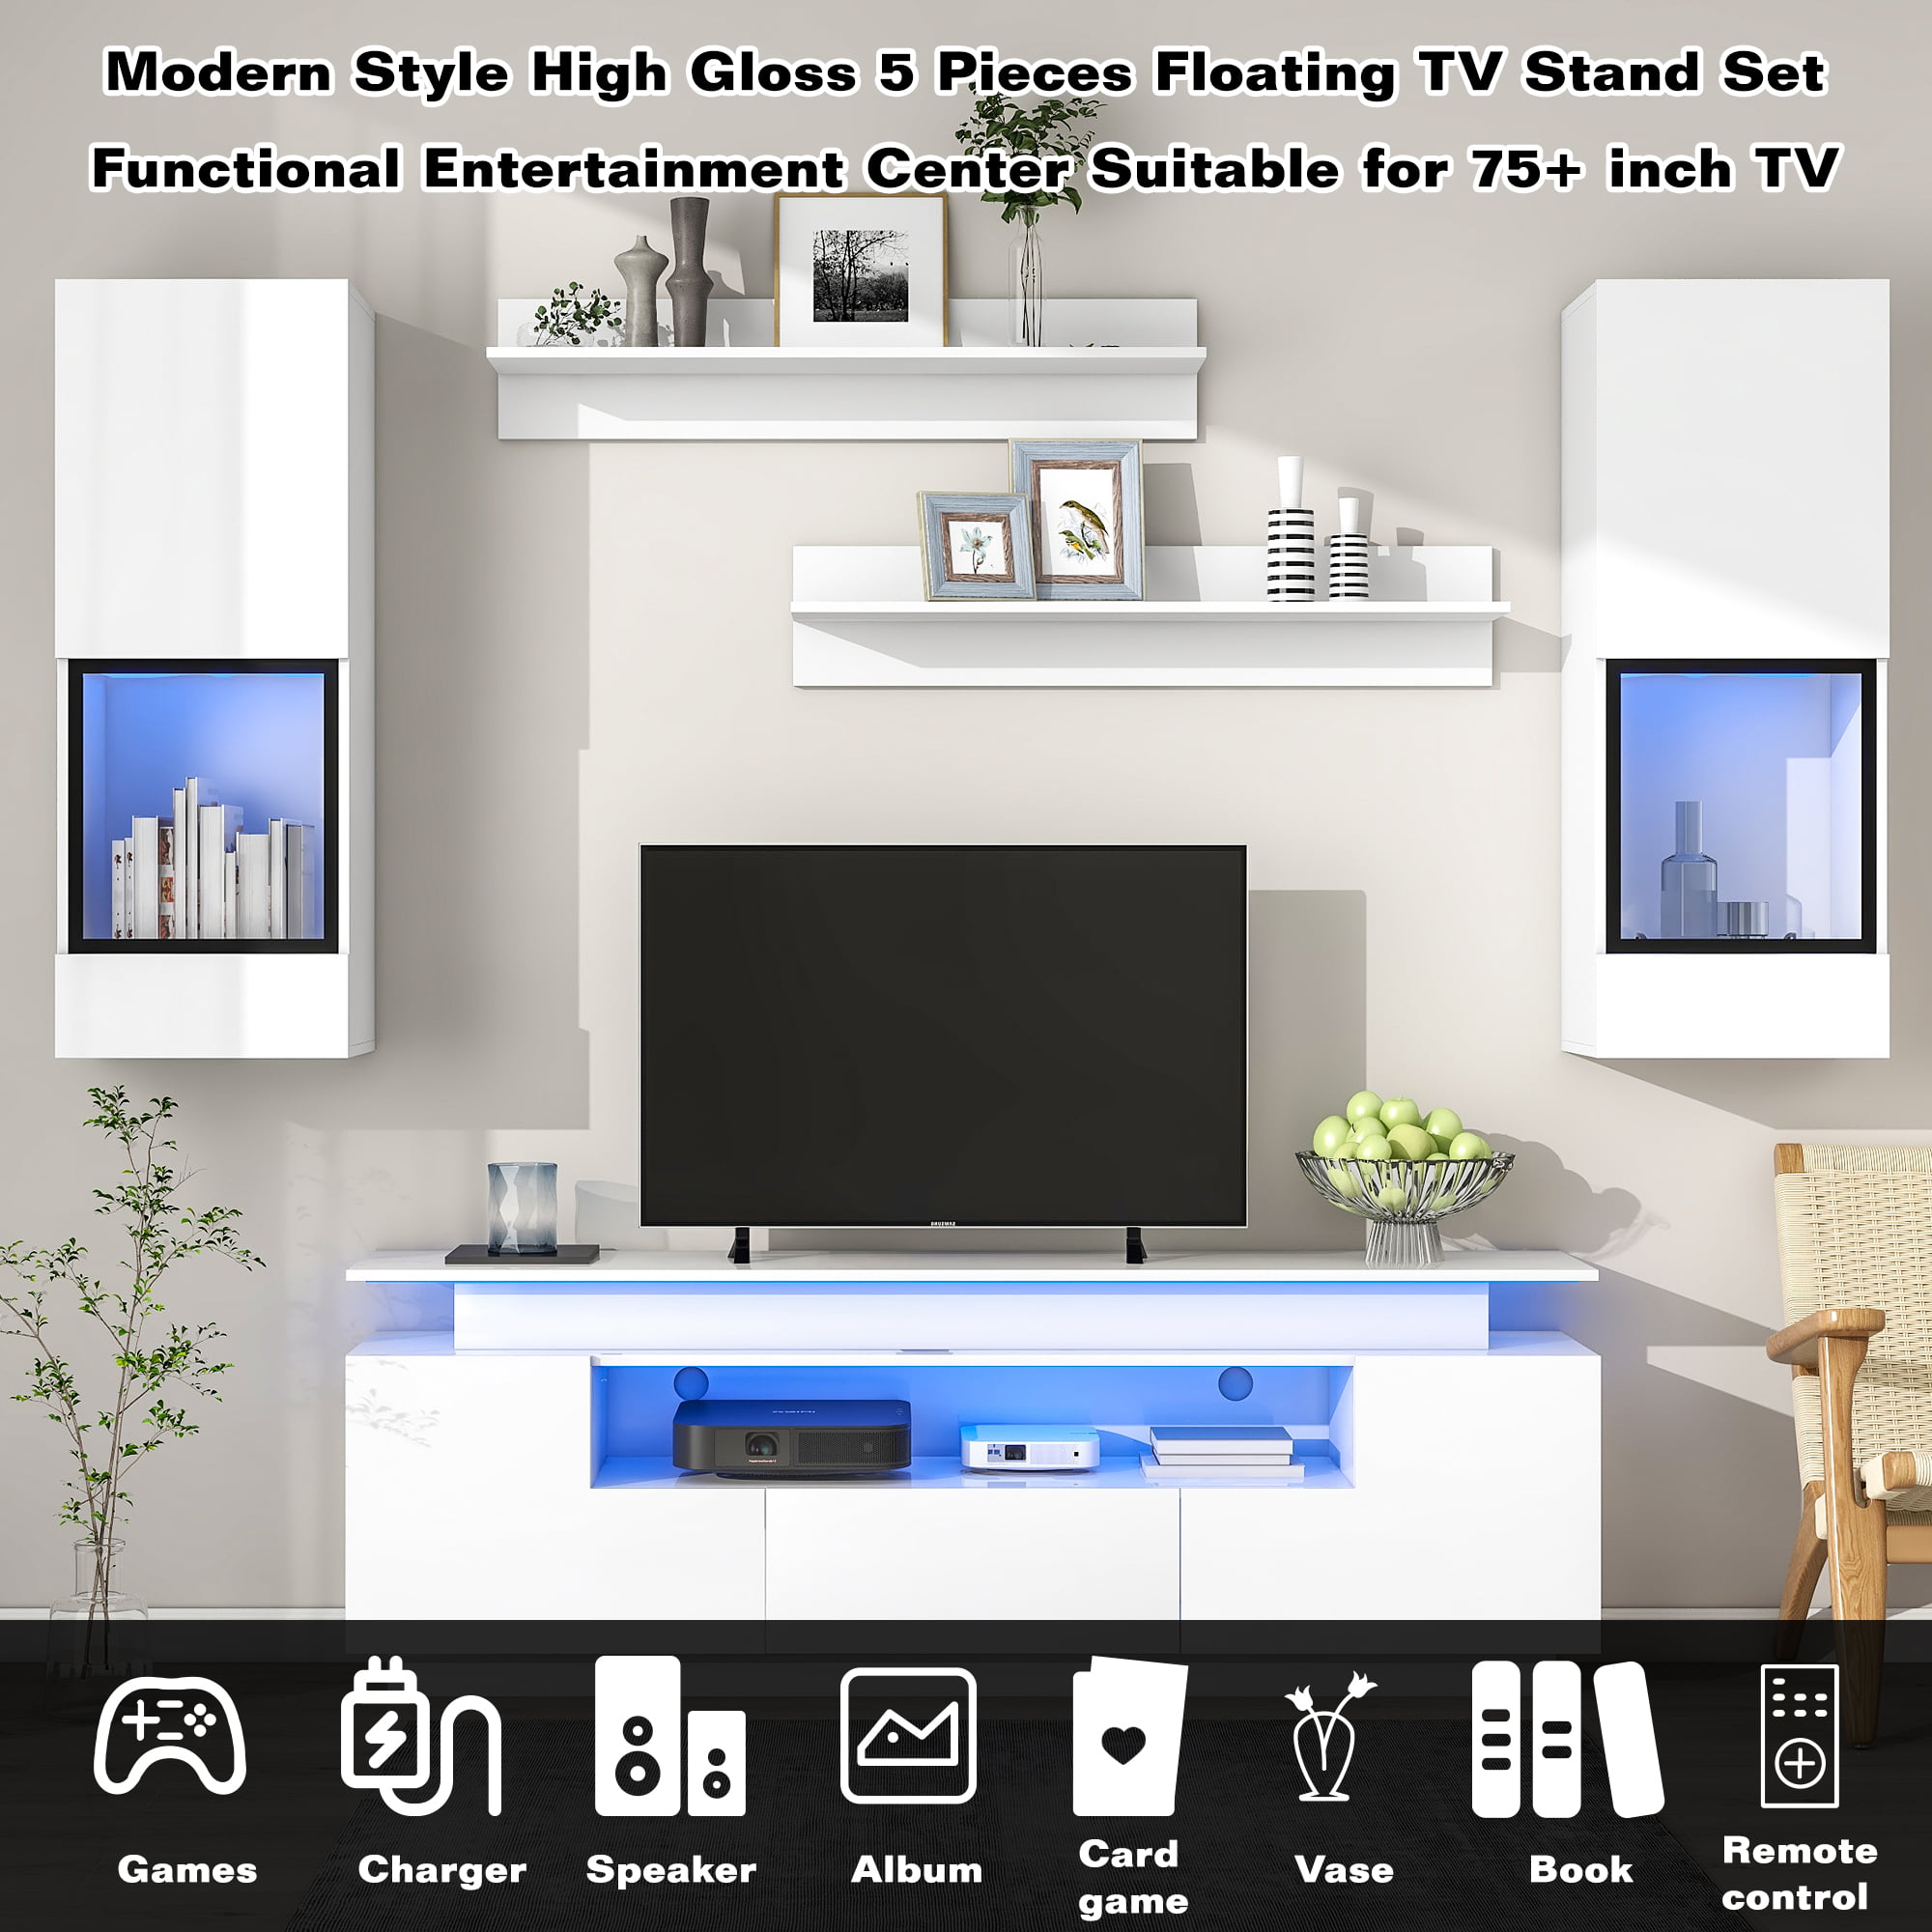 5 Pieces Floating Tv Stand Set With 16-color LED Light Strips For 75+ Inch TV - SD000012AAK